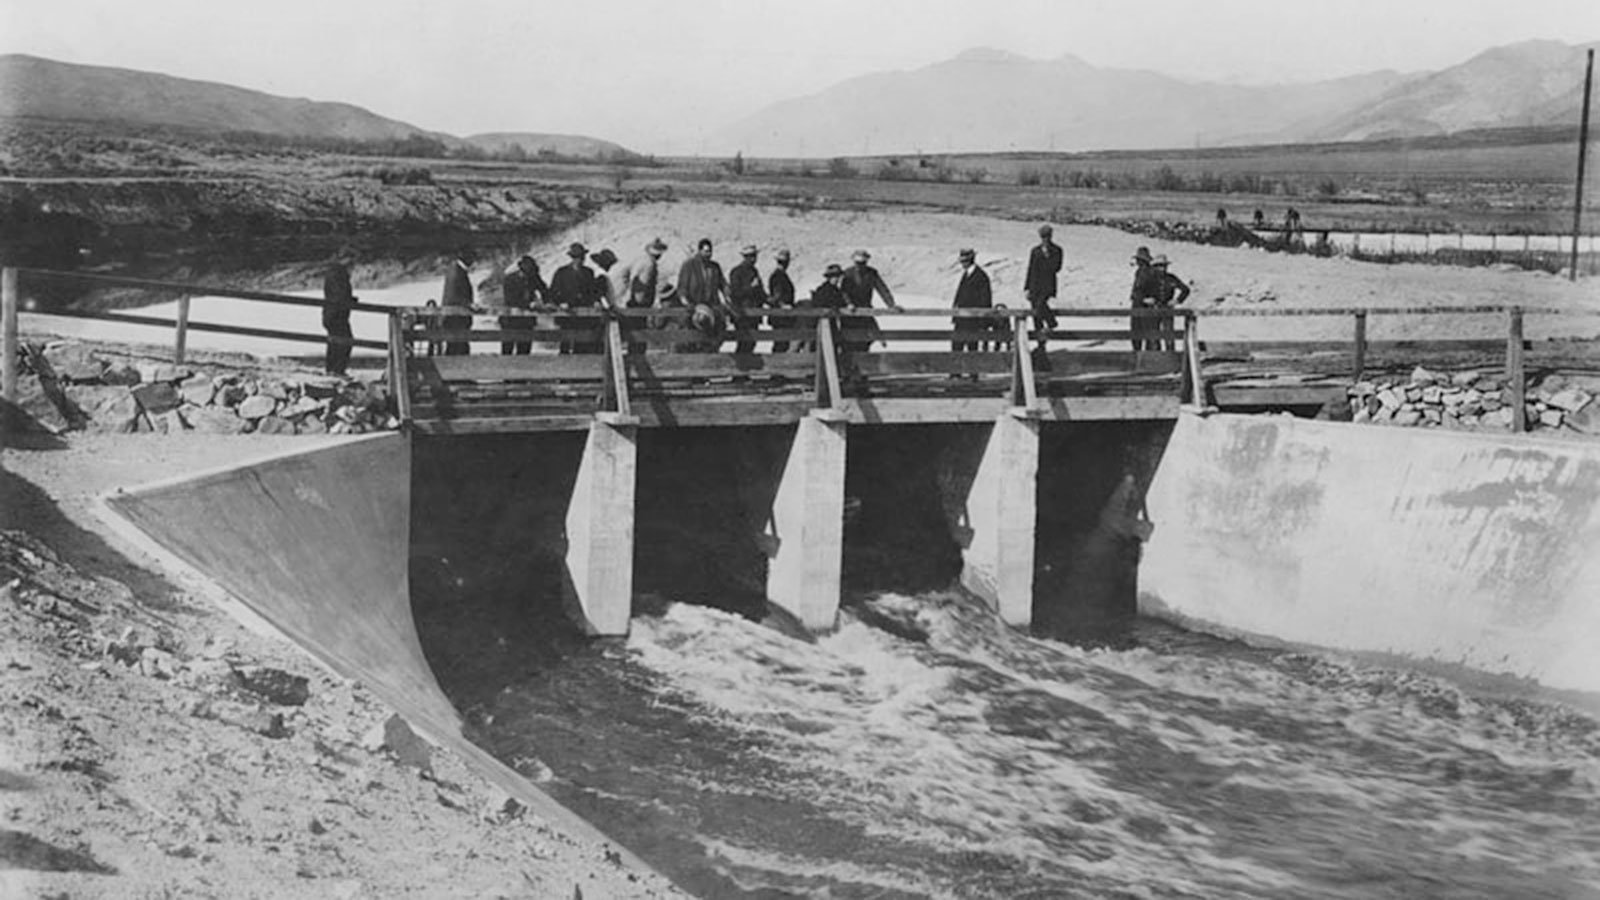 The Owens River flowing into the Los Angeles Aqueduct